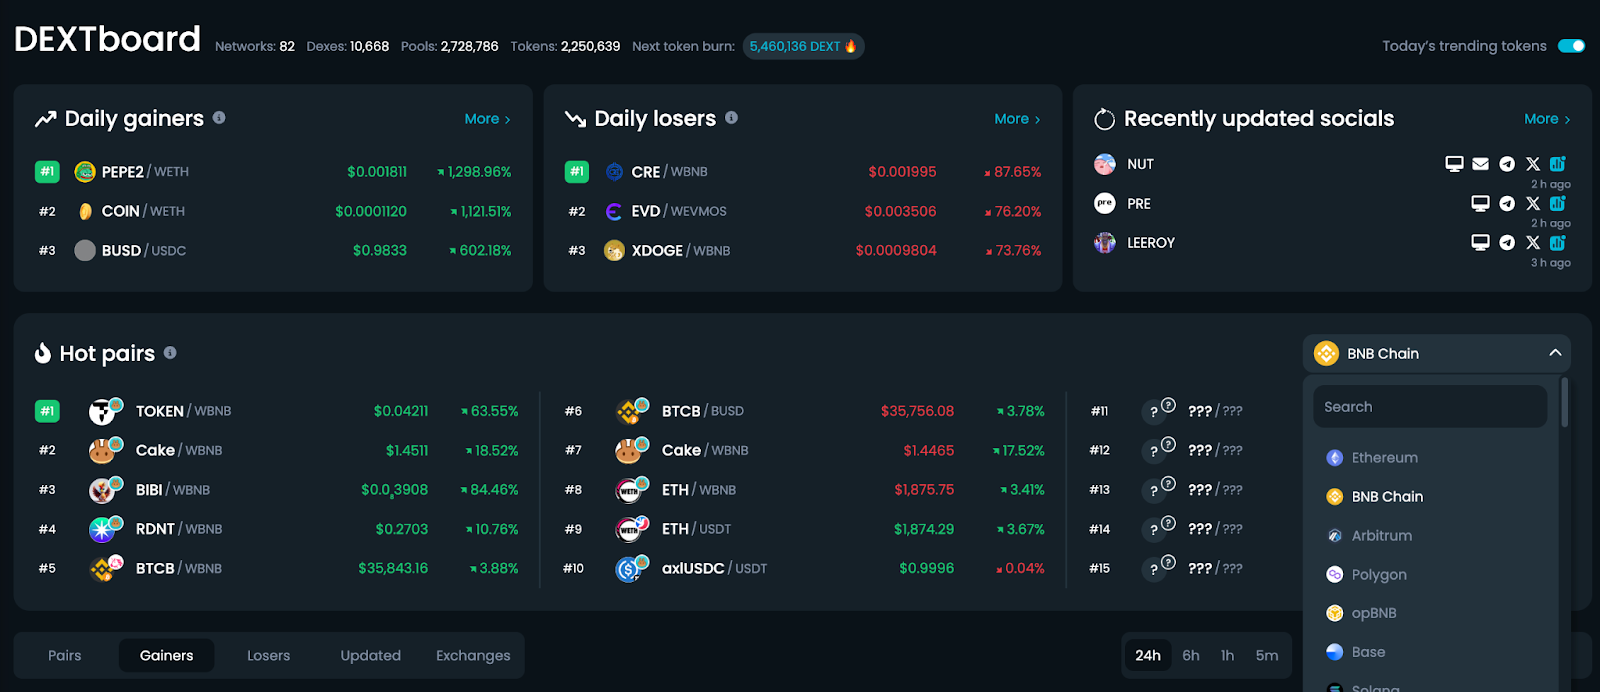 DexTools daily gainers 